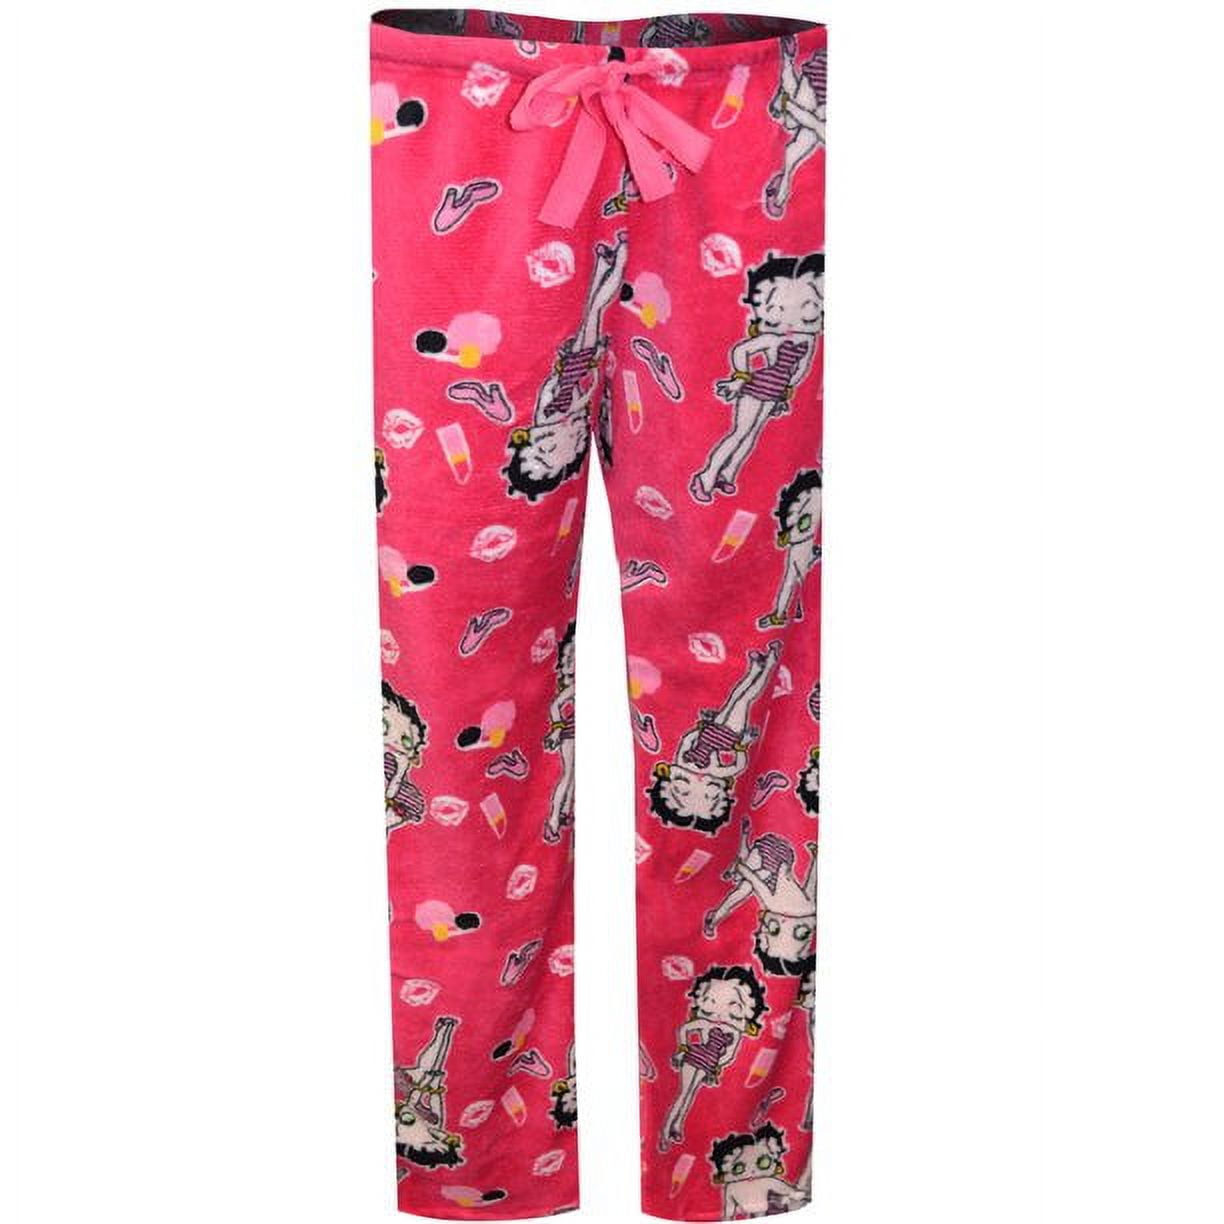 Betty Boop Women's Betty Boop Hot Pink Large Lounge Pants 